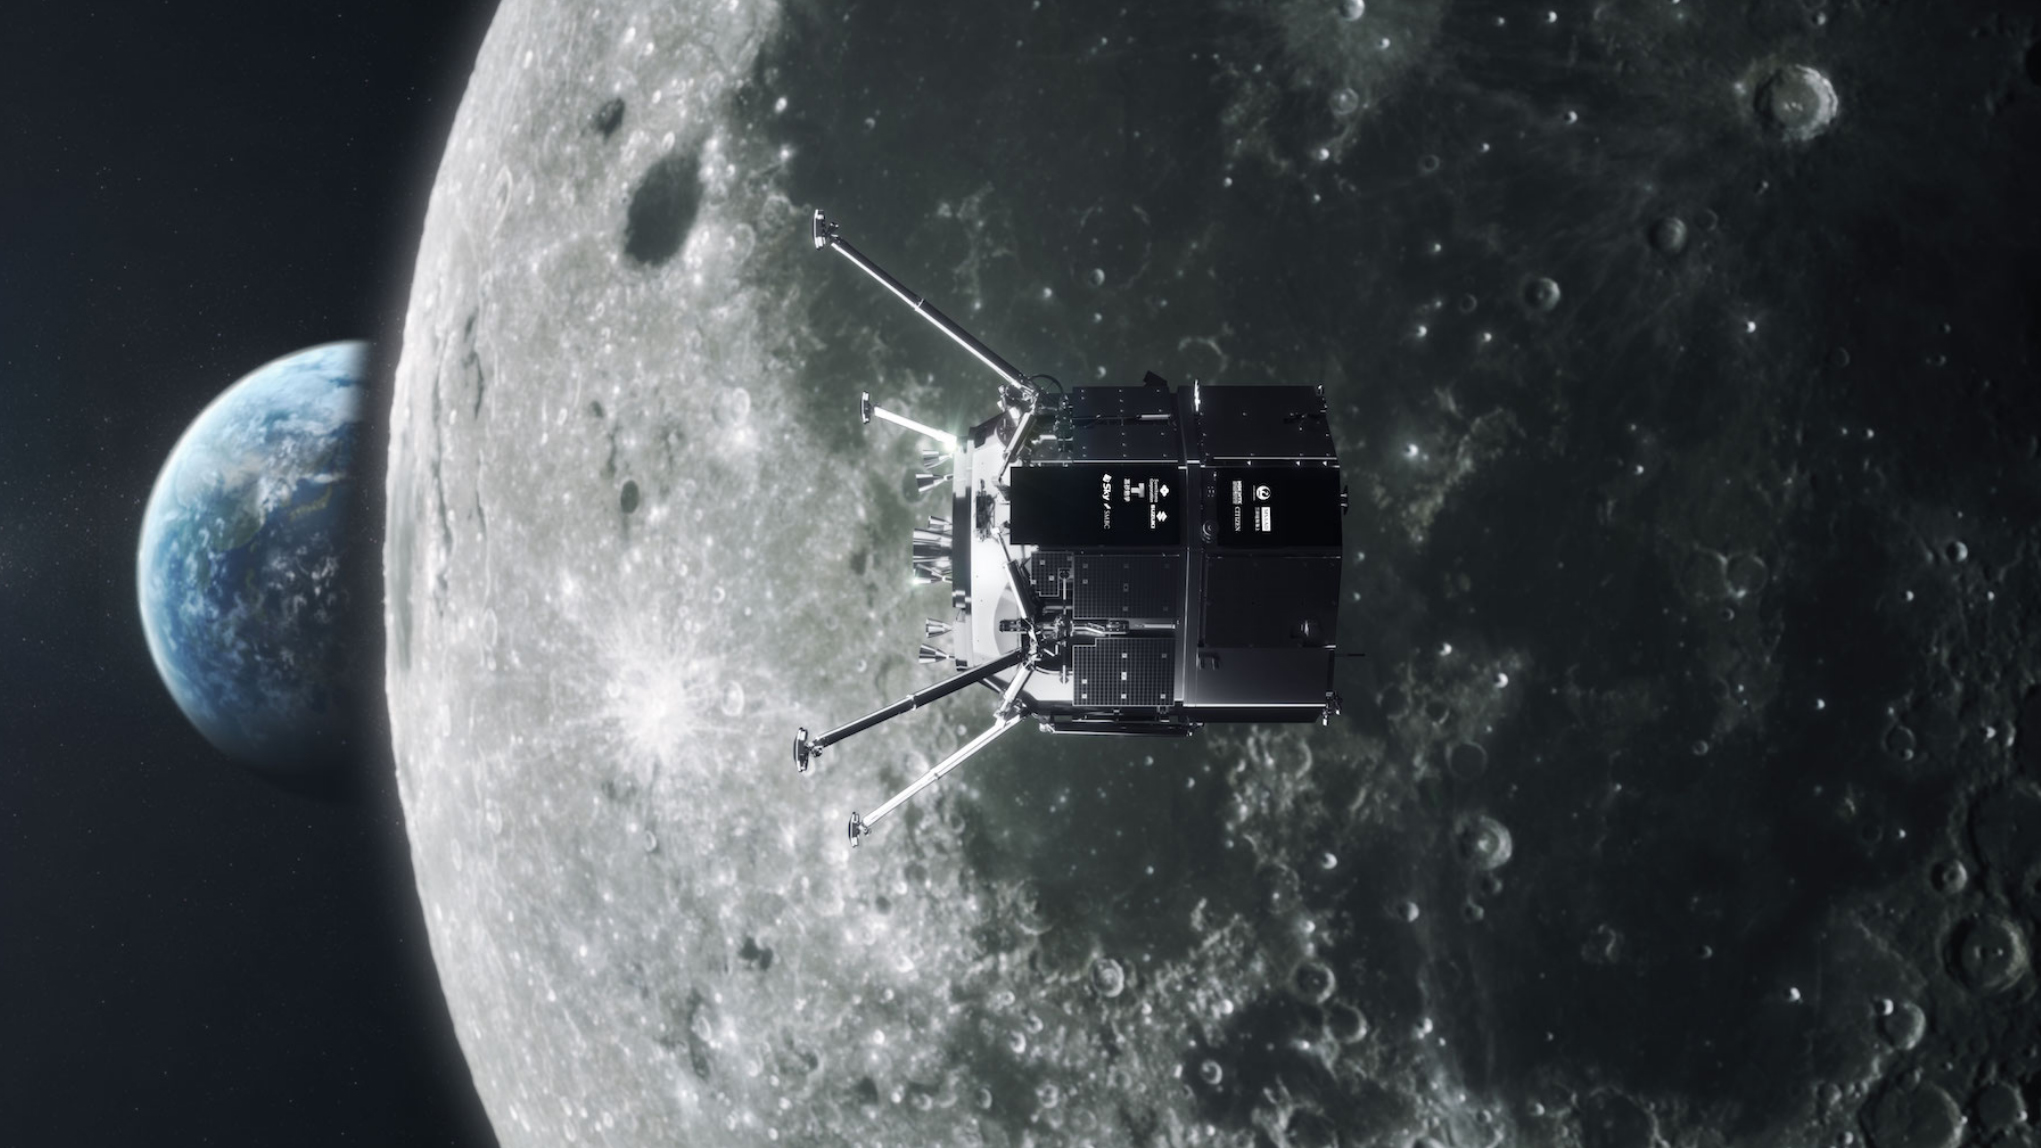 A private moon lander will make history when it touches down on April 25. Here's how to watch it live